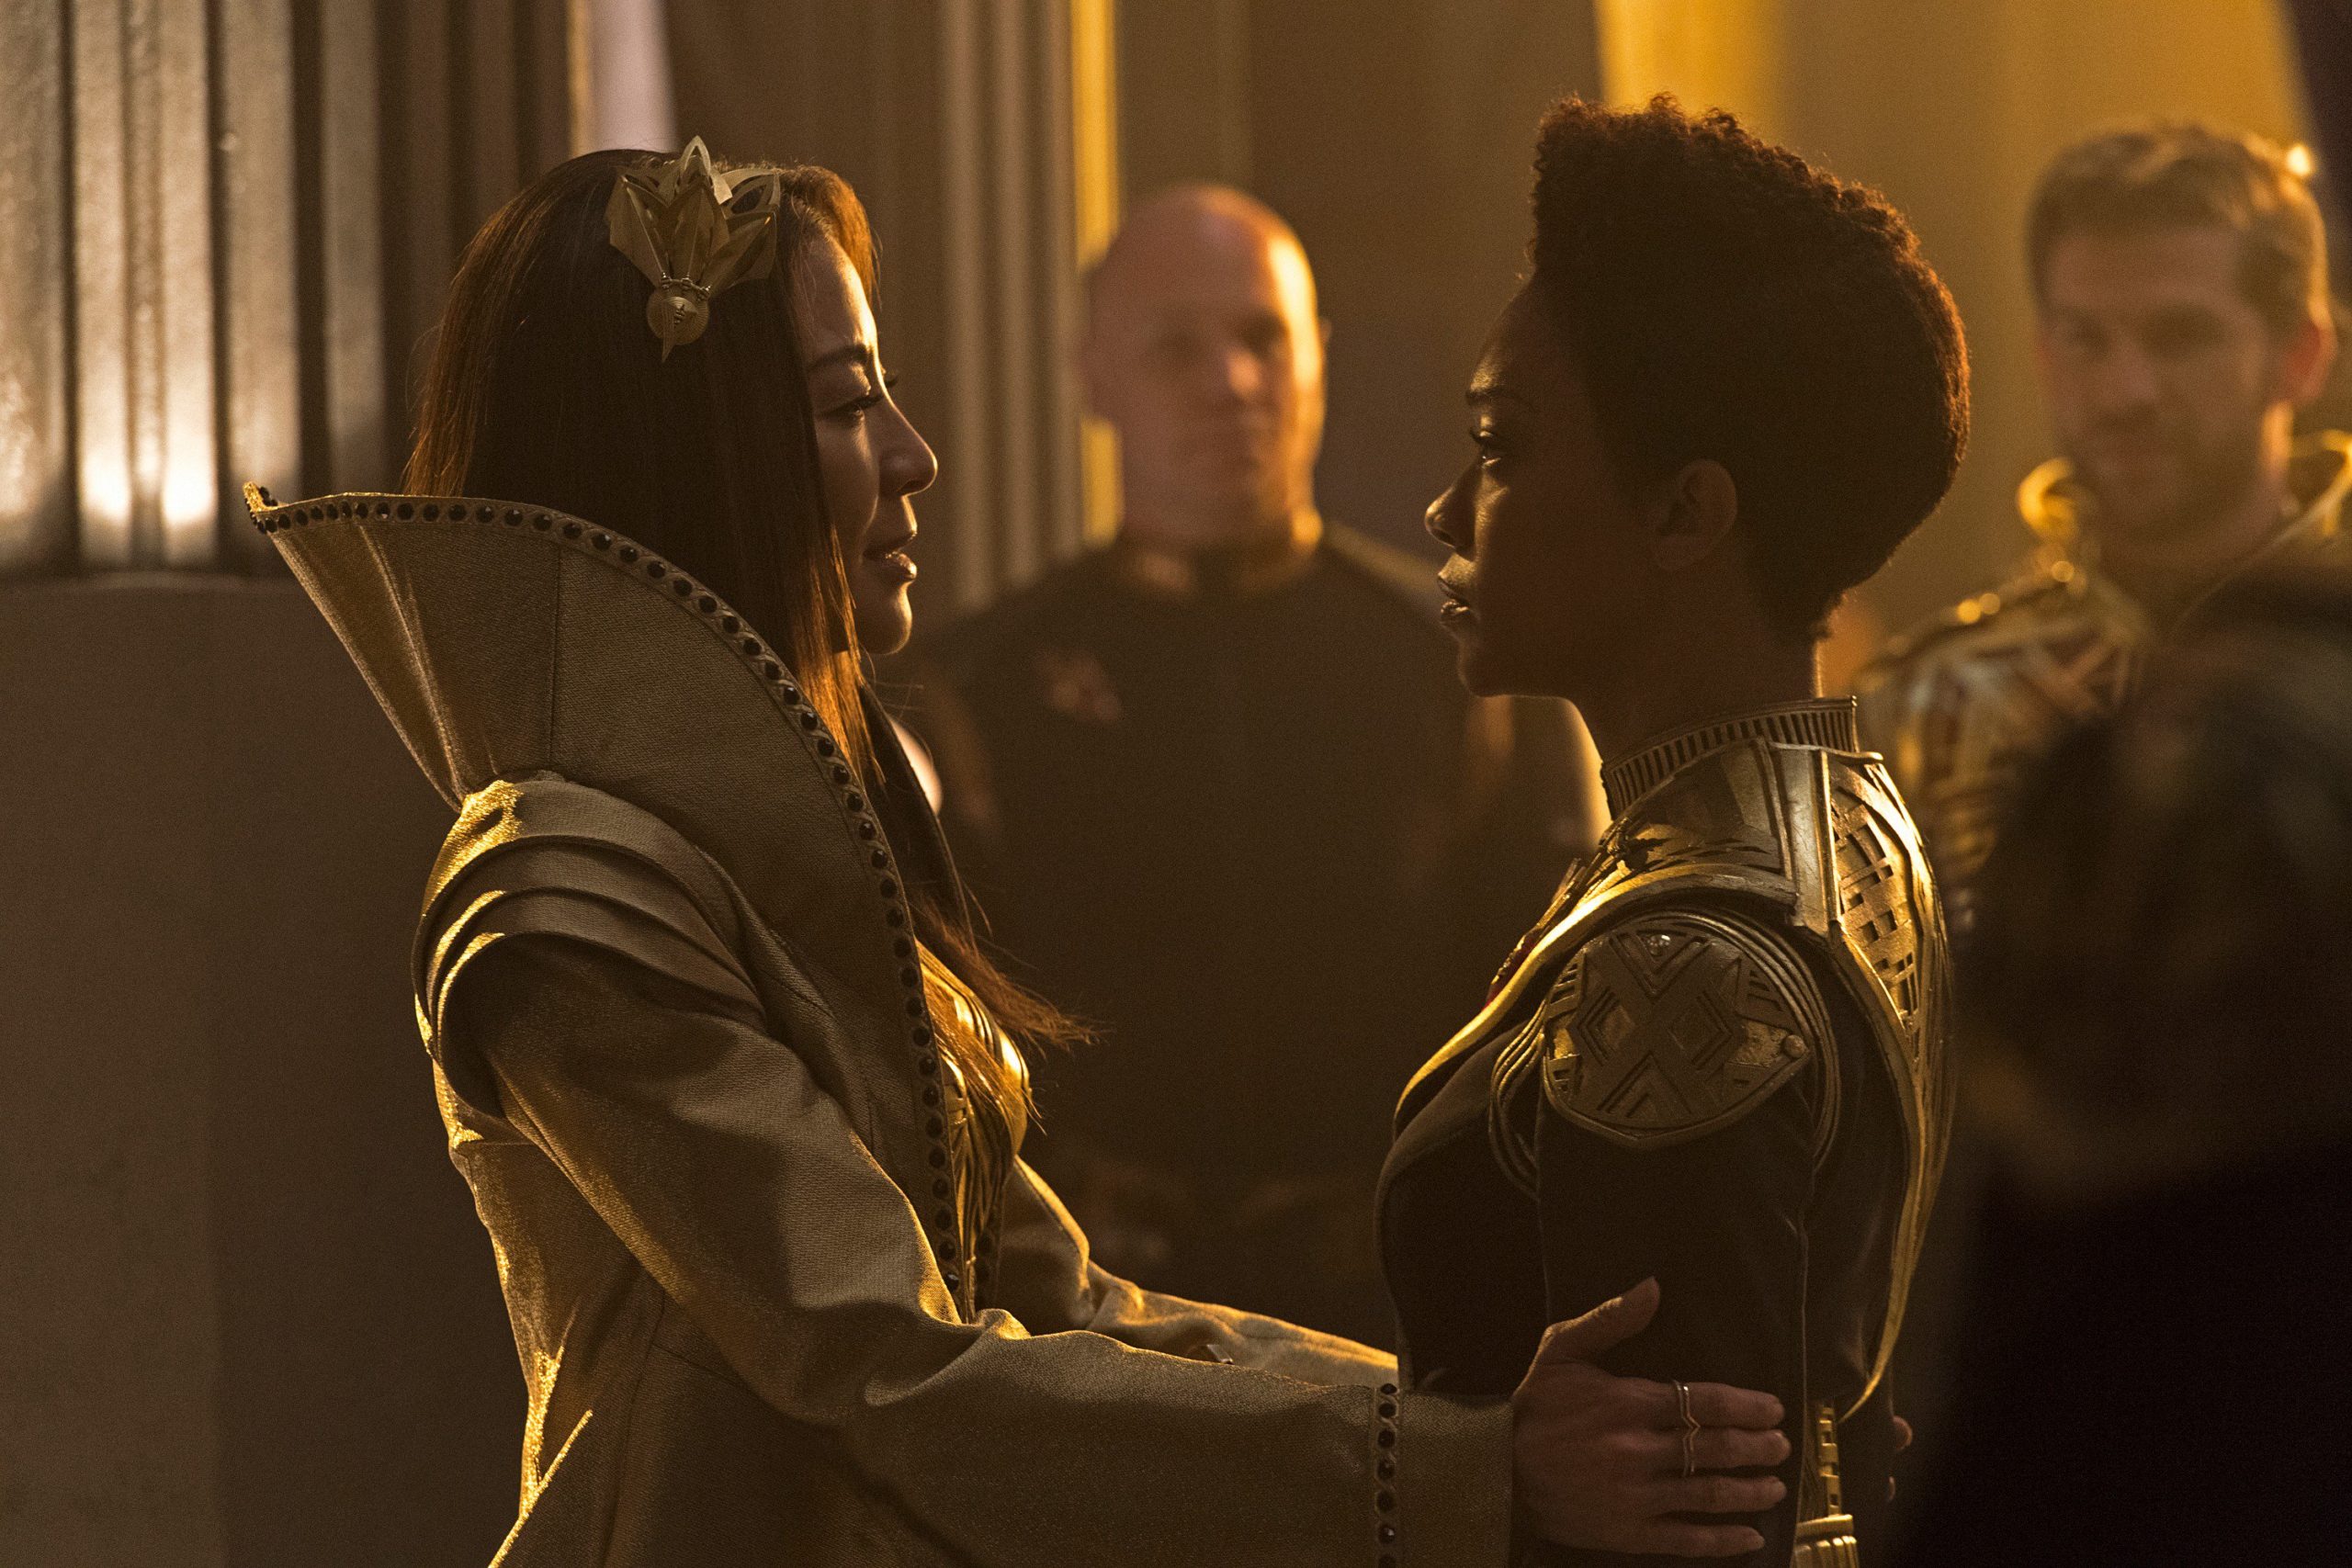 Star Trek: Discovery’s Horrible New Twist Made A Great Case For Rage-Quitting The Show